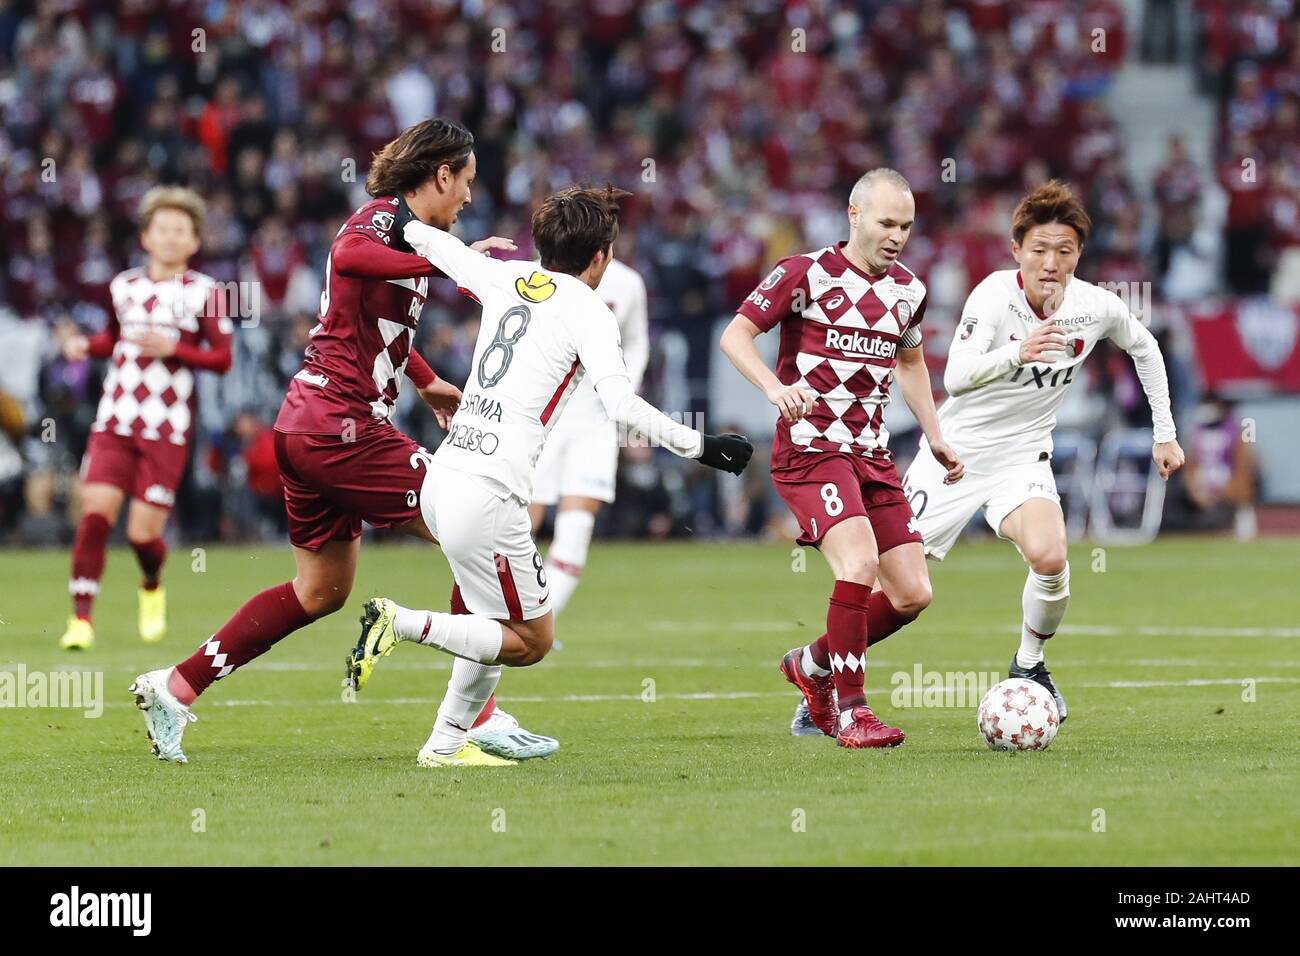 Tokyo, Japan. 1st Jan, 2020. Vissel Kobe's Andres Iniesta (Cap.) in action during the Emperor's Cup JFA 99th Japan Football Championship final match between Vissel Kobe and Kashima Antlers at the new National Stadium. Vissel Kobe defeats Kashima Antlers 2-0. 57,597 people attended the first sports match held at the new National Stadium, which will be a venue for the Tokyo 2020 Olympic and Paralympic Games. Credit: Rodrigo Reyes Marin/ZUMA Wire/Alamy Live News Stock Photo